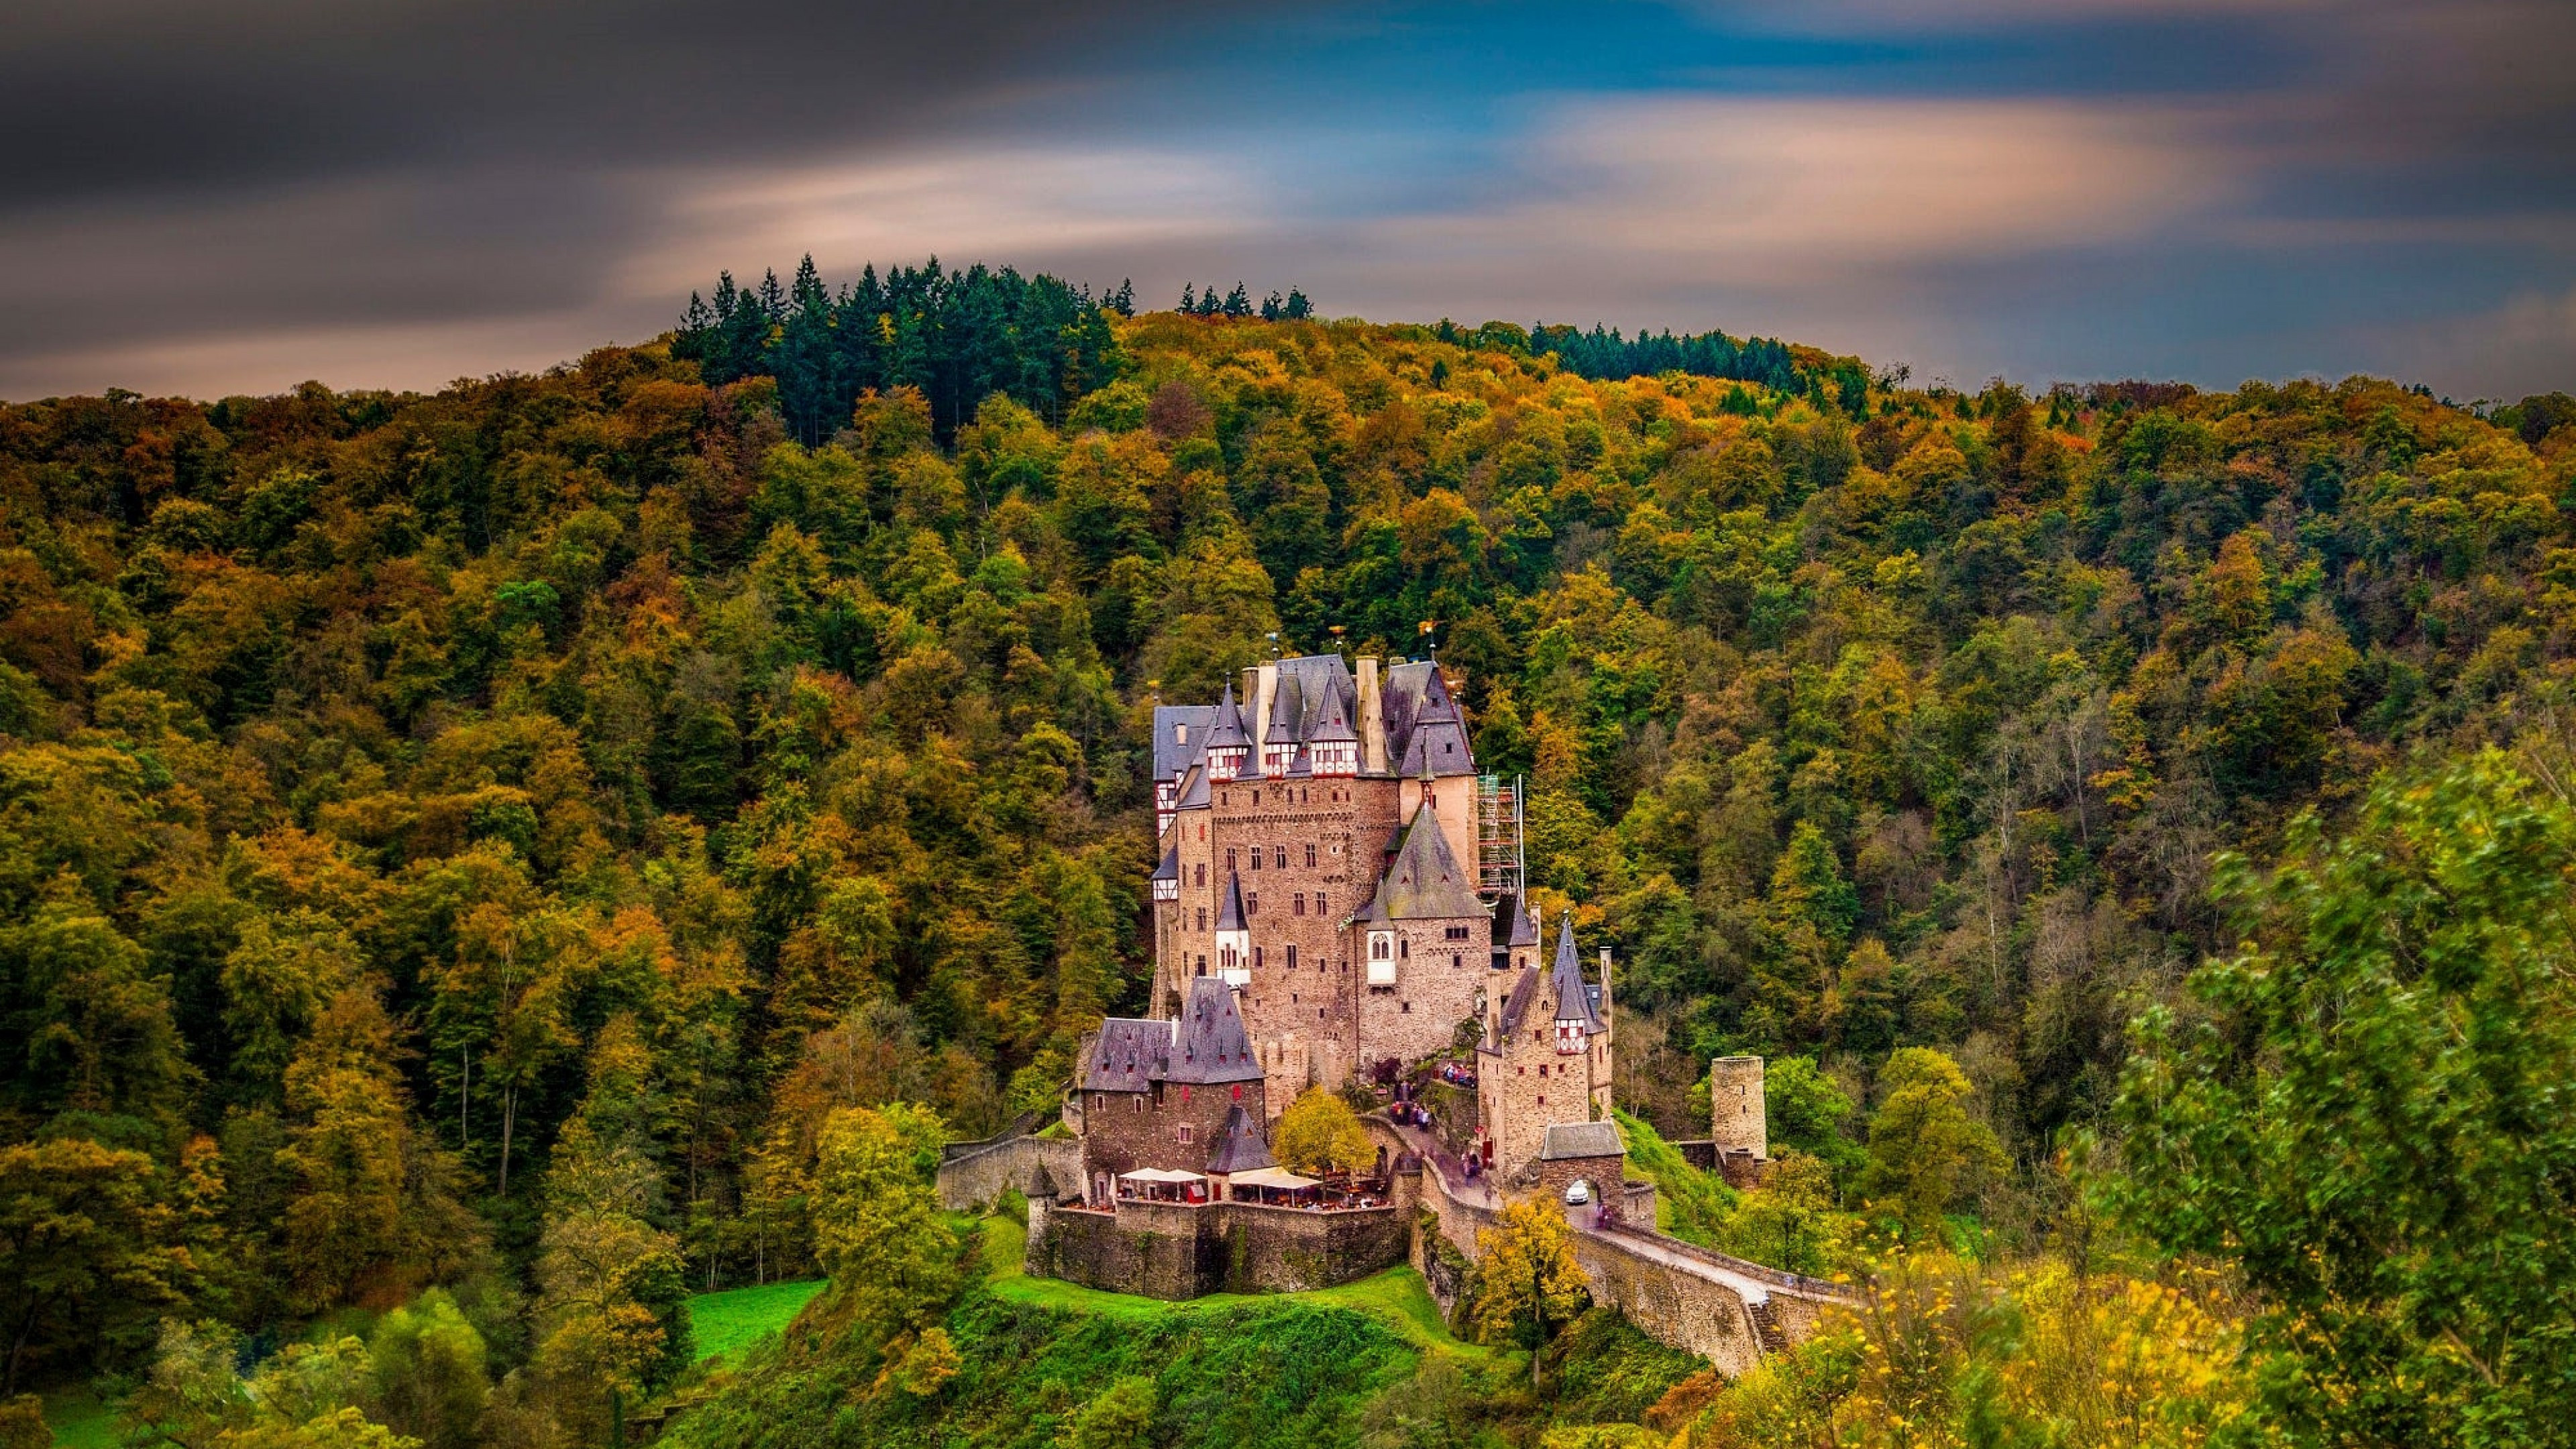 Castle: Eltz, Owned by a branch of House of Eltz who have lived there since the 12th century, Germany. 3840x2160 4K Wallpaper.